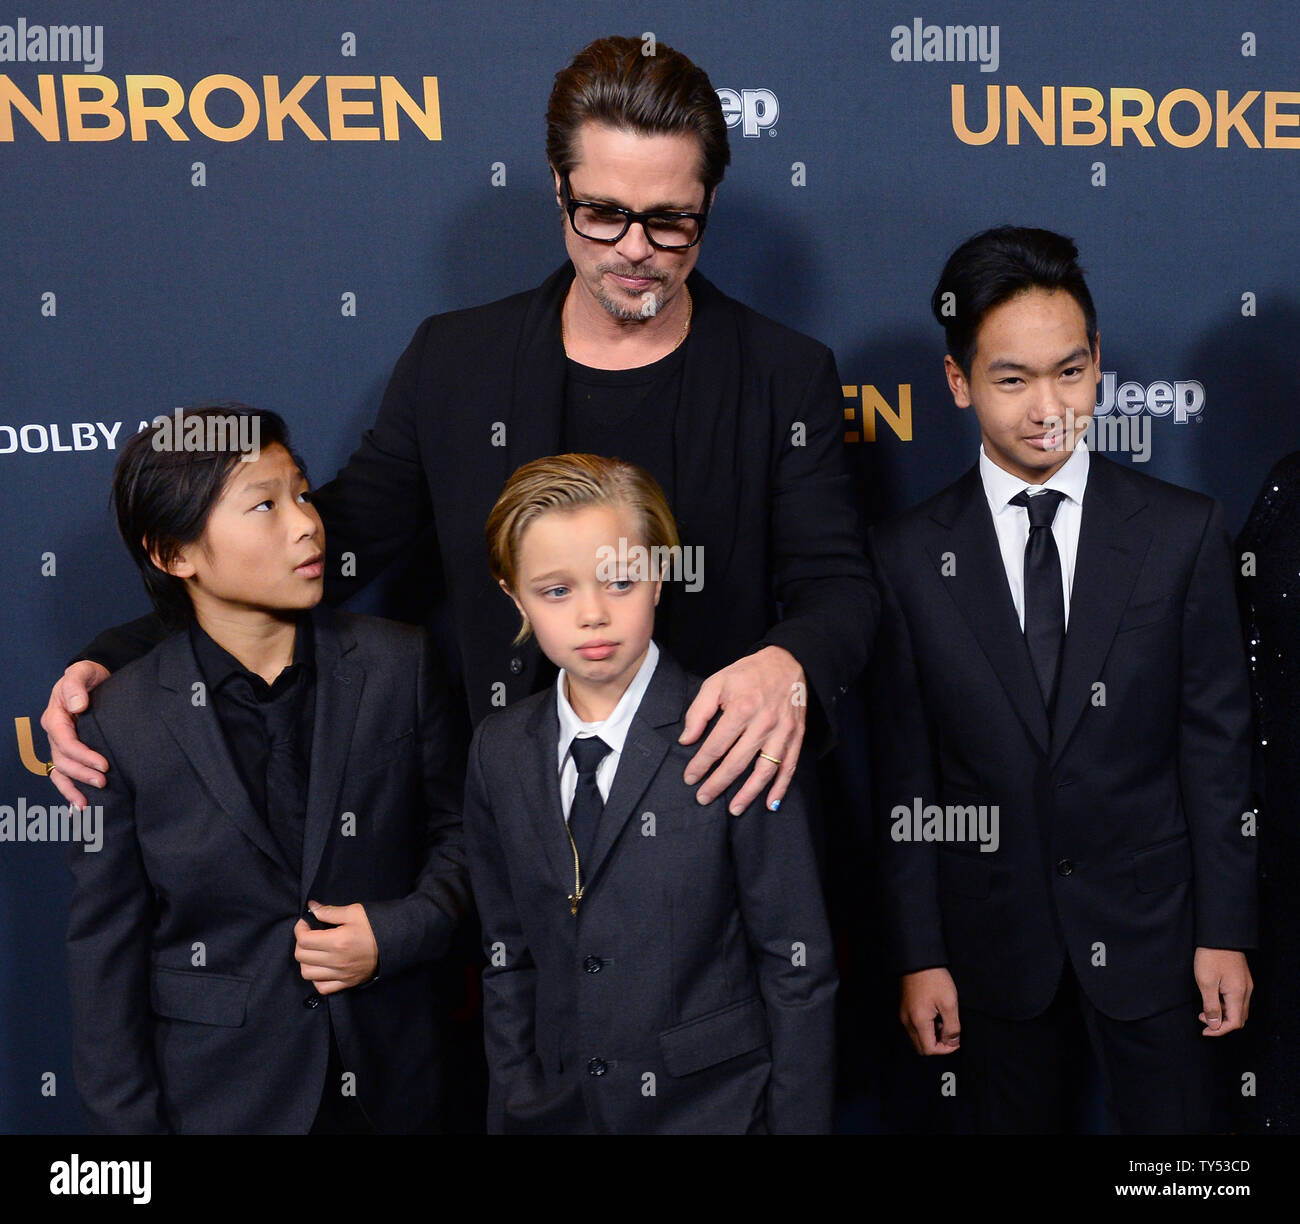 Actor Brad Pitt attends the premiere of the biographical motion picture war drama 'Unbroken' with his children Pax Thien Jolie-Pitt, Shiloh Nouvel Jolie-Pitt, Maddox Jolie-Pitt (L-R) at the Dolby Theatre in the Hollywood section of Los Angeles on December 15, 2014. Storyline: After a near-fatal plane crash in WWII, Olympian Louis Zamperini spends a harrowing 47 days in a raft with two fellow crewmen before he's caught by the Japanese navy and sent to a prisoner-of-war camp.  UPI/Jim Ruymen Stock Photo